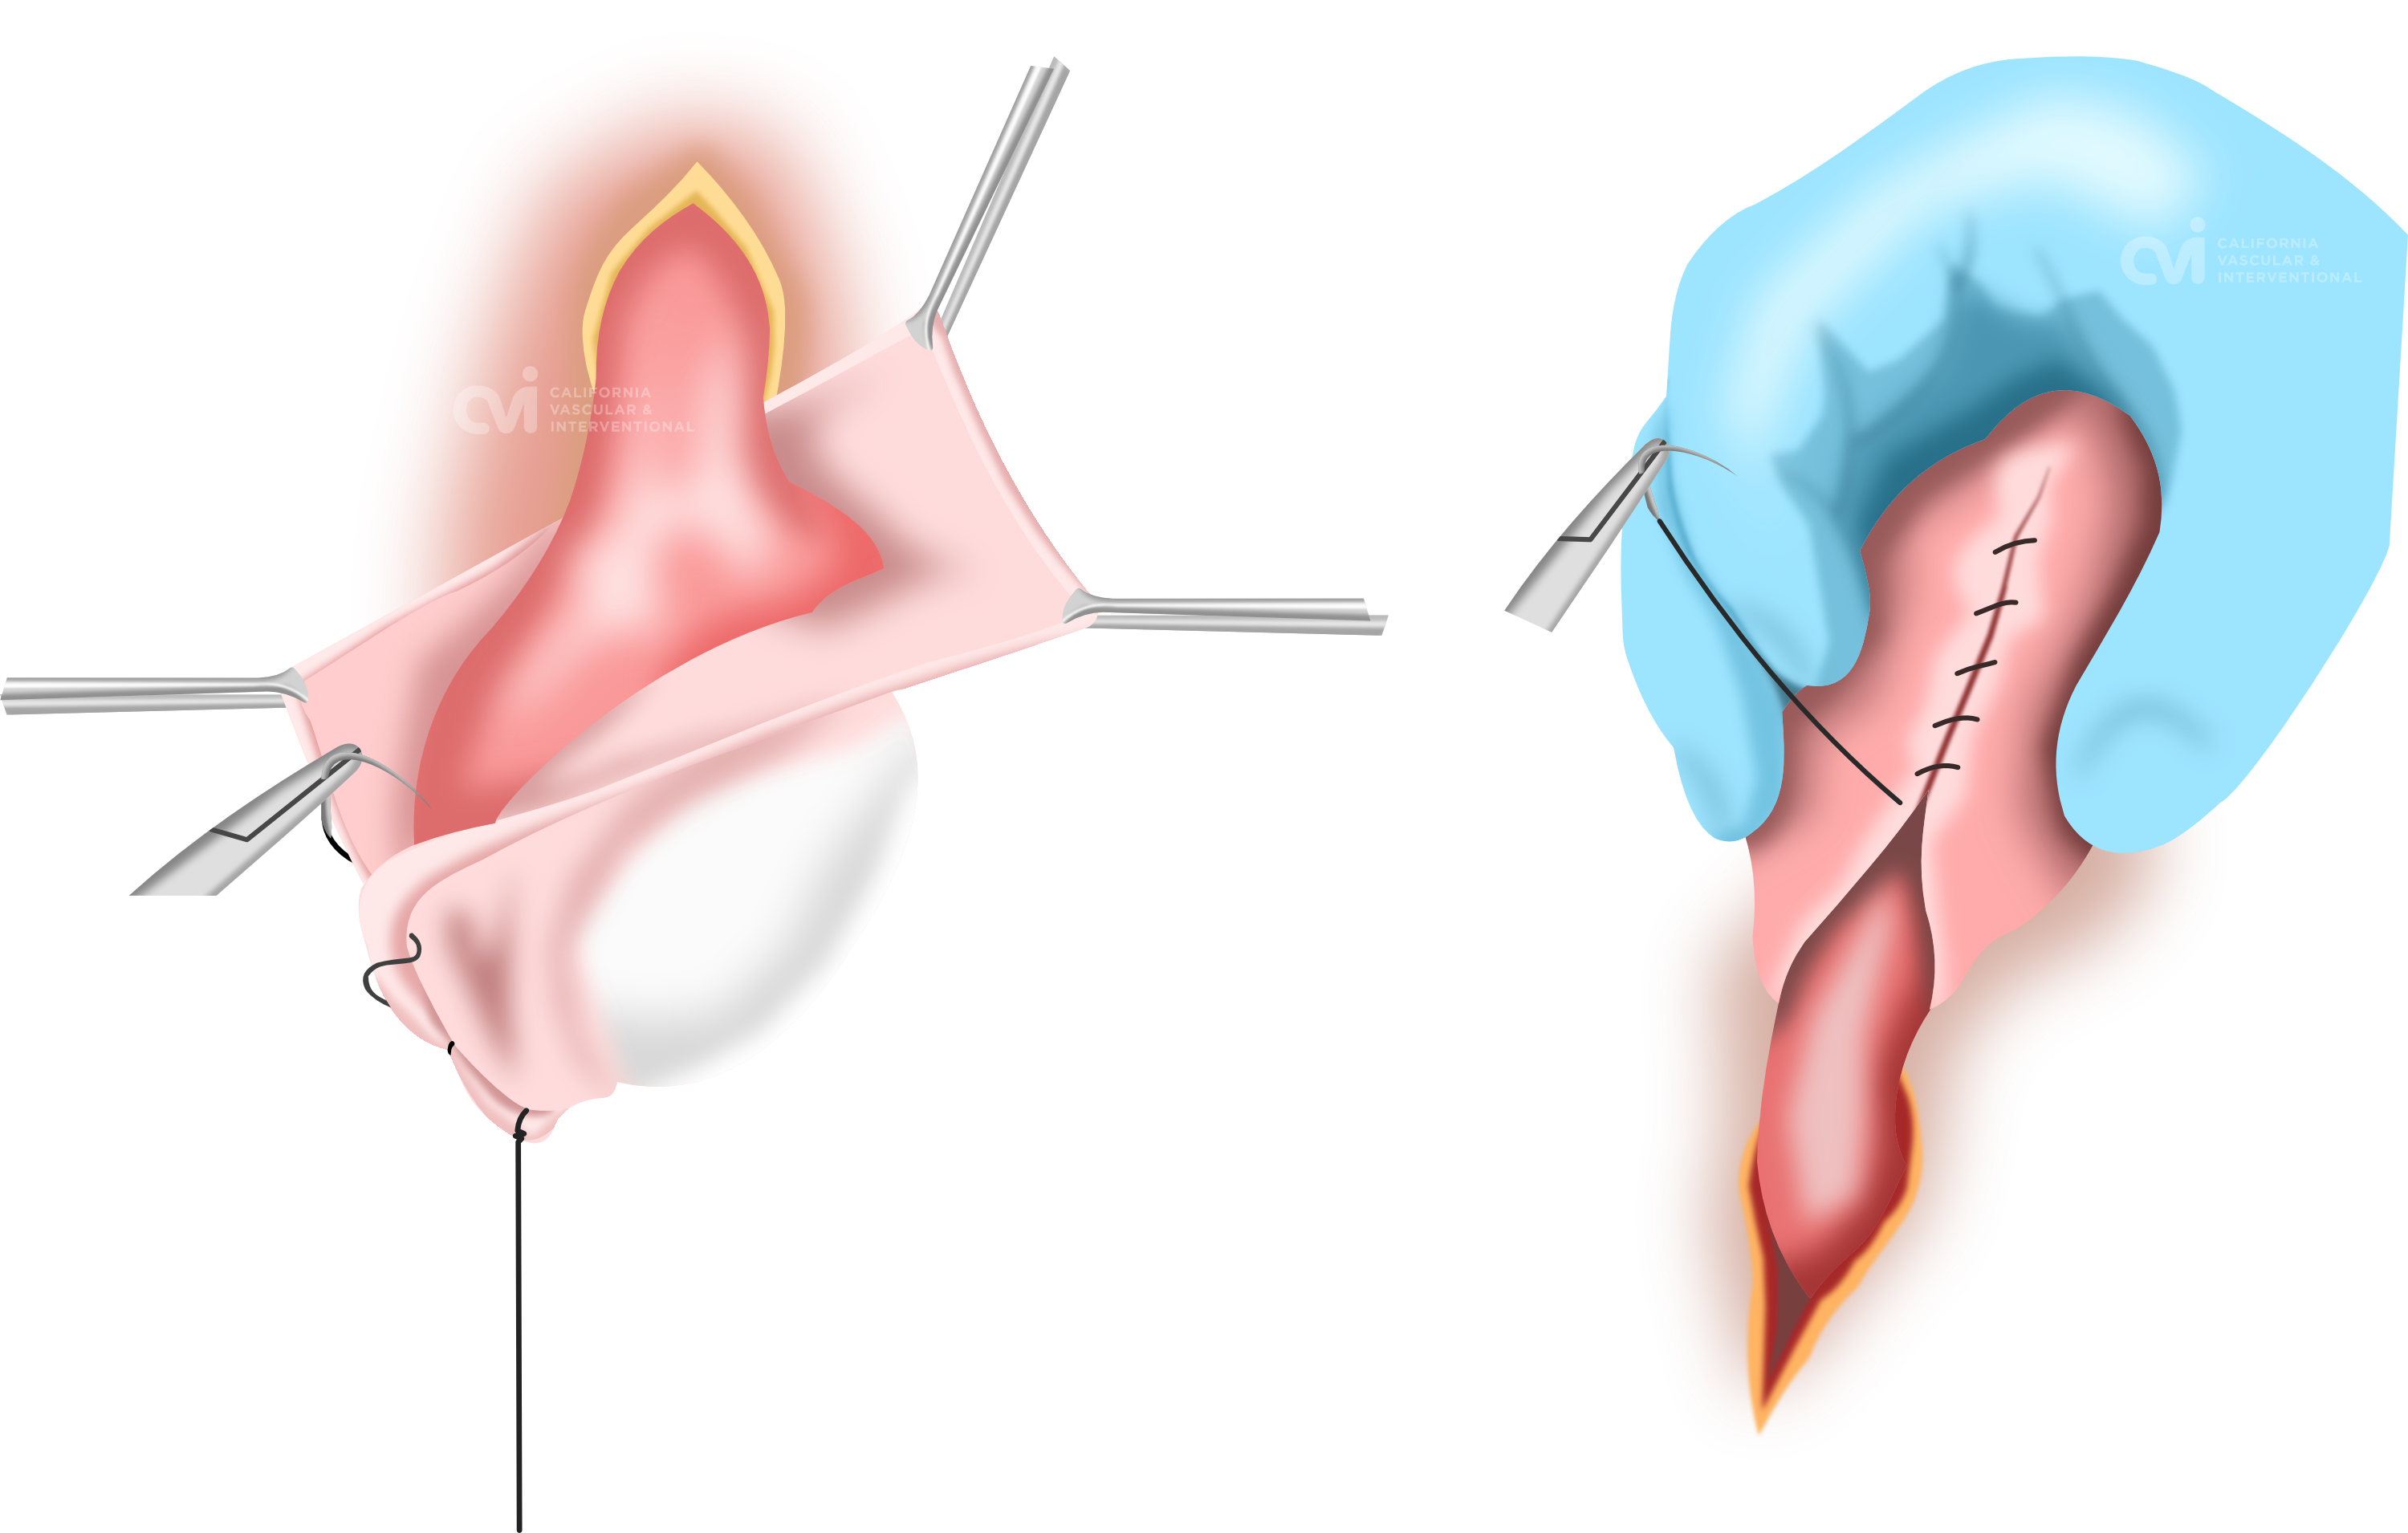 Surgical Hydrocelectomy illustration for hydrocele treatment doctor, Los Angeles, California, Cavascular.com